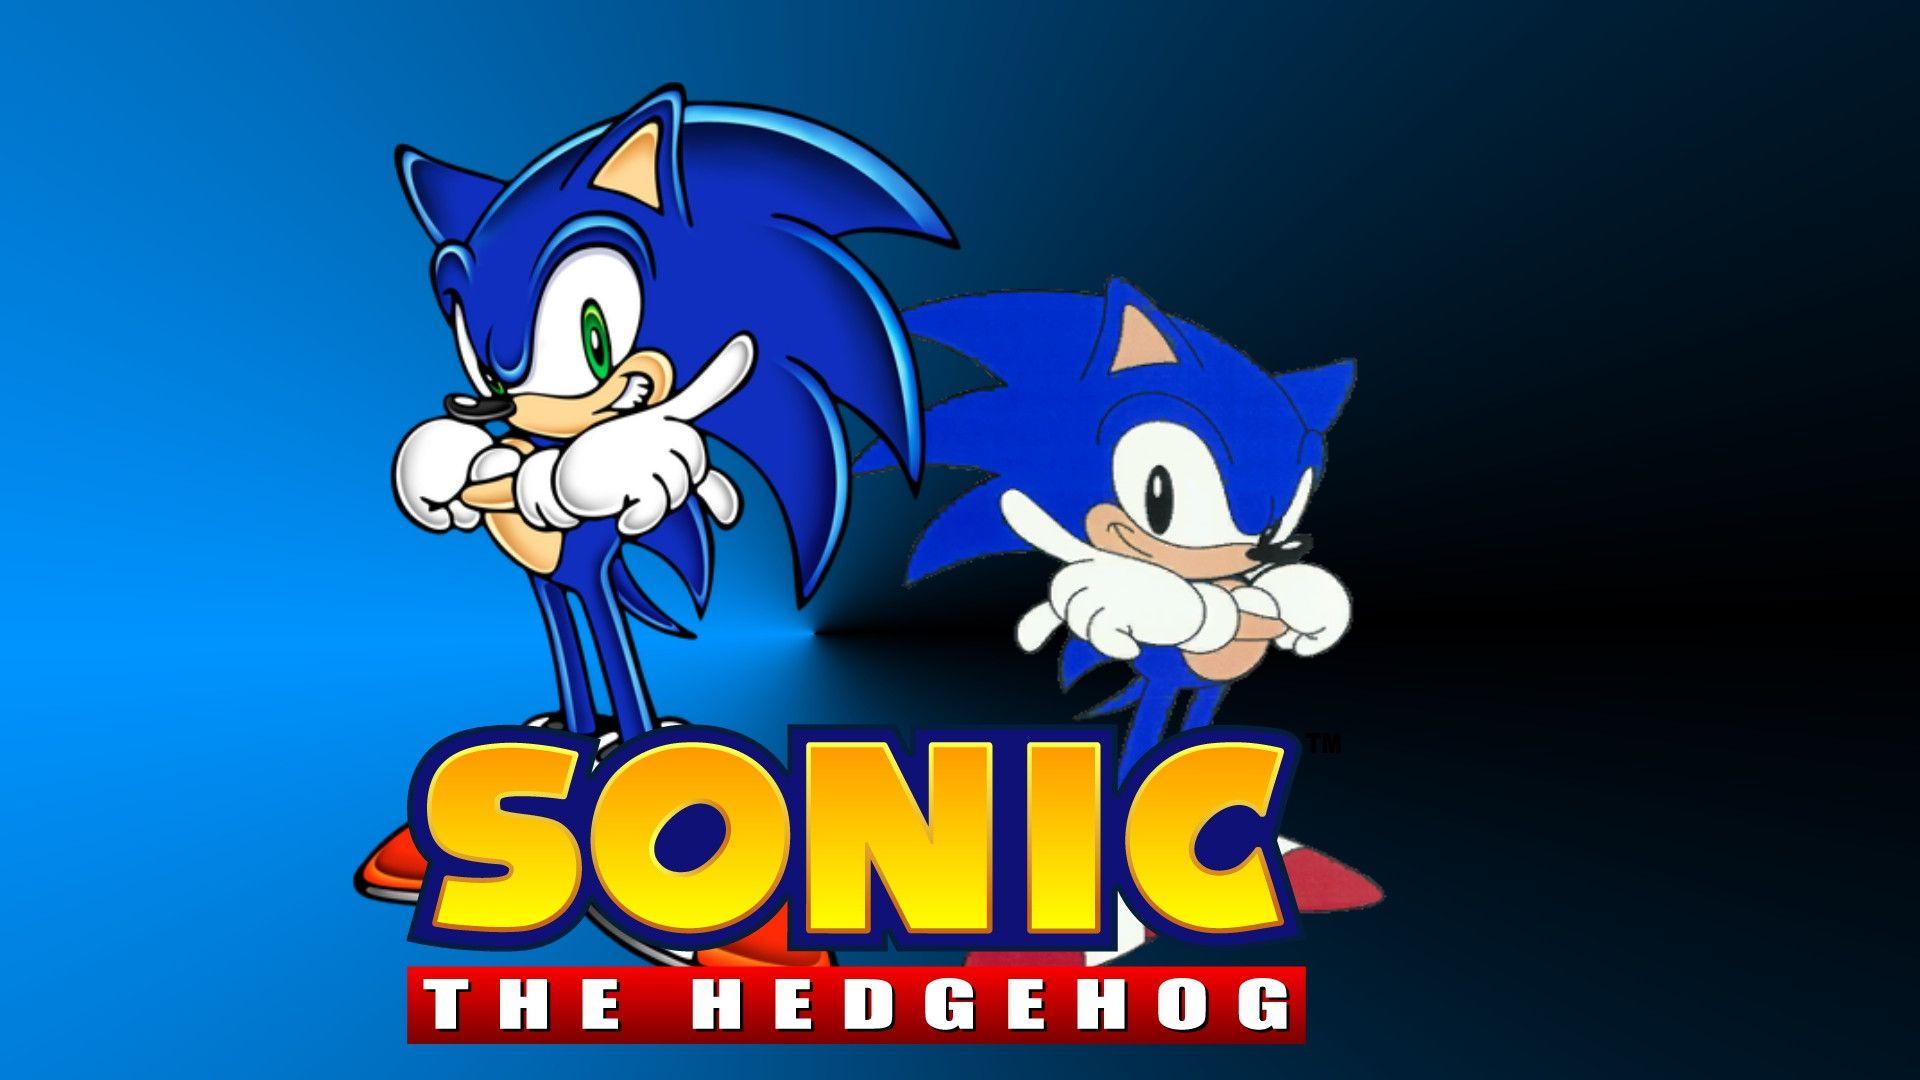 Sonic the hedgehog wallpapers by BlueSpeed